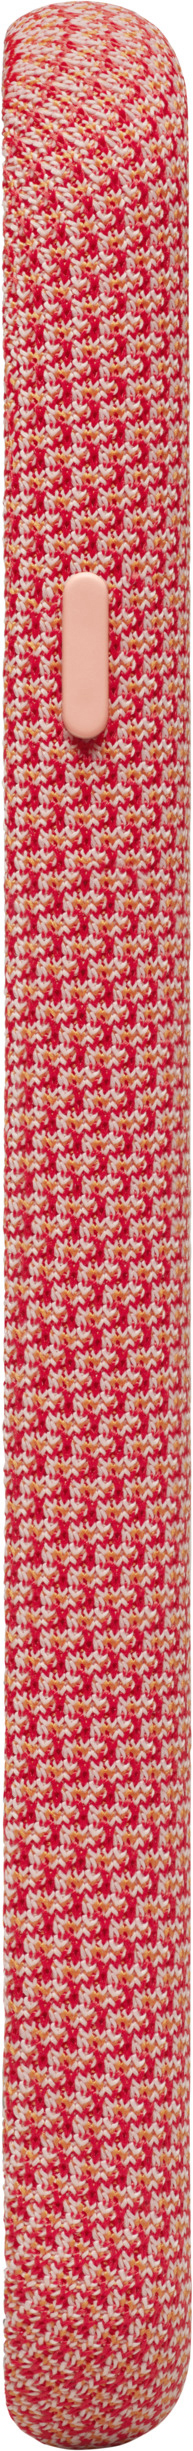 GOOGLE GA01282, Could Backcover, 4, Pixel Google, be Coral